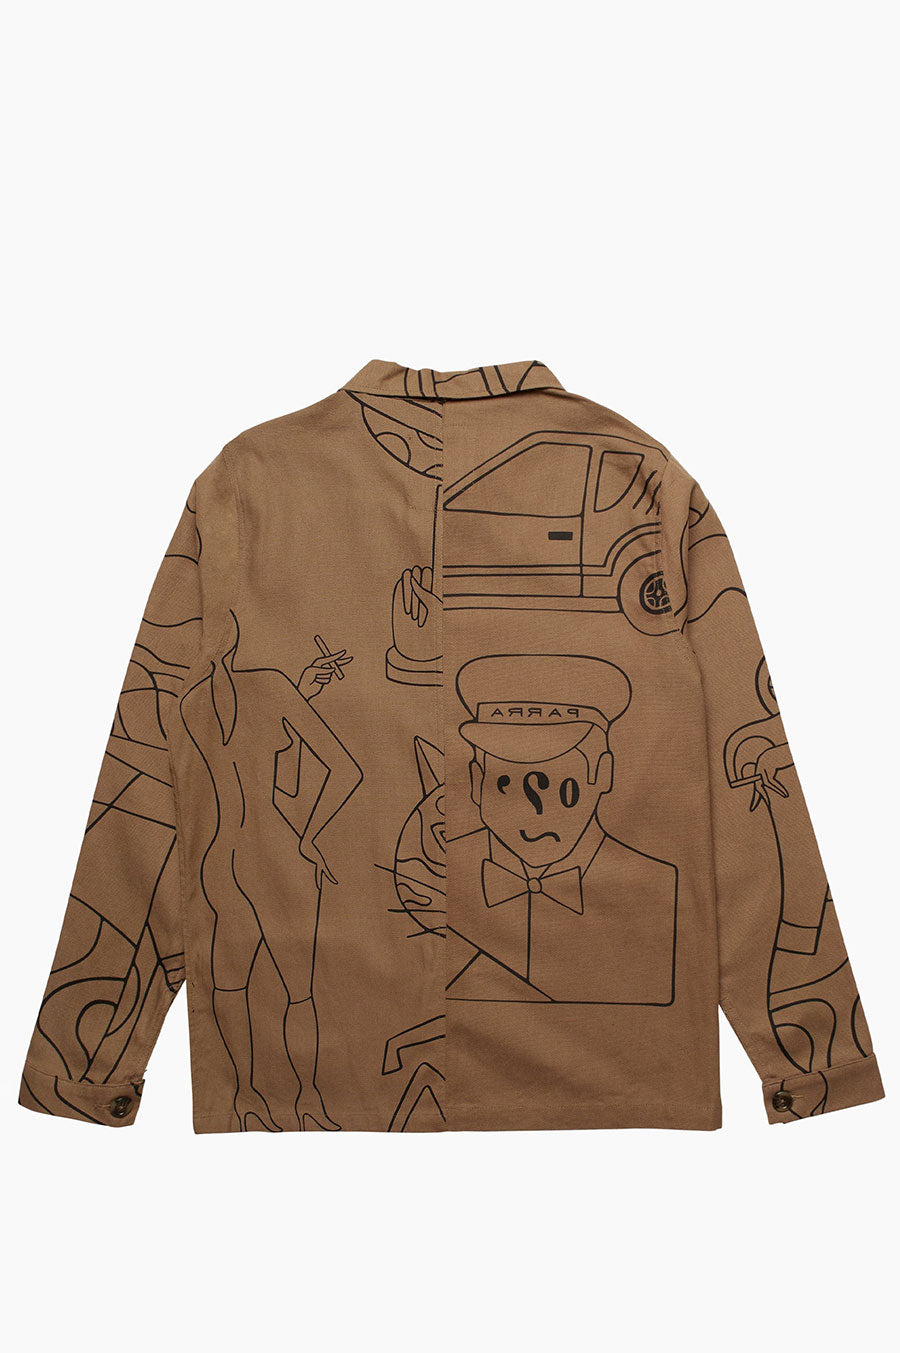 PARRA EXPERIENCE LIFE WORKER JACKET CAMEL